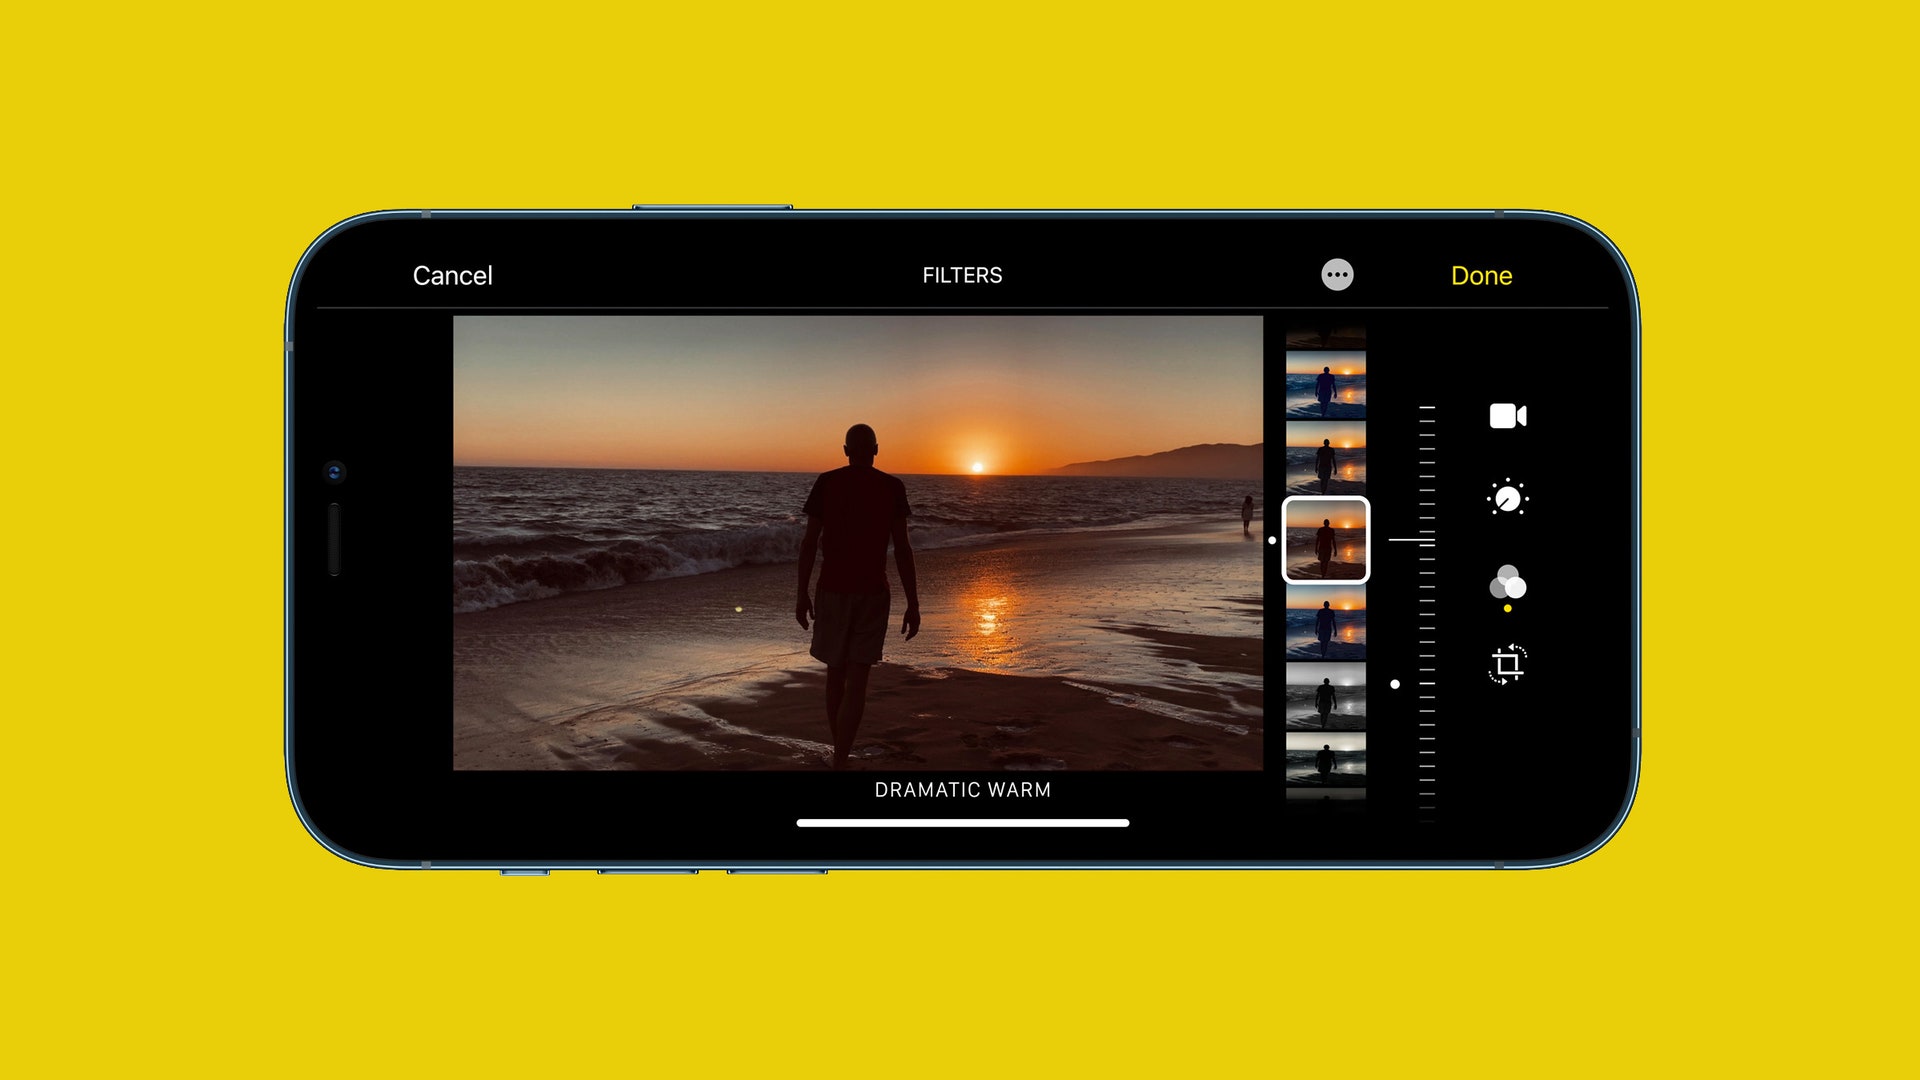 Editing photos: With these 7 apps it is easy to do on your mobile phone